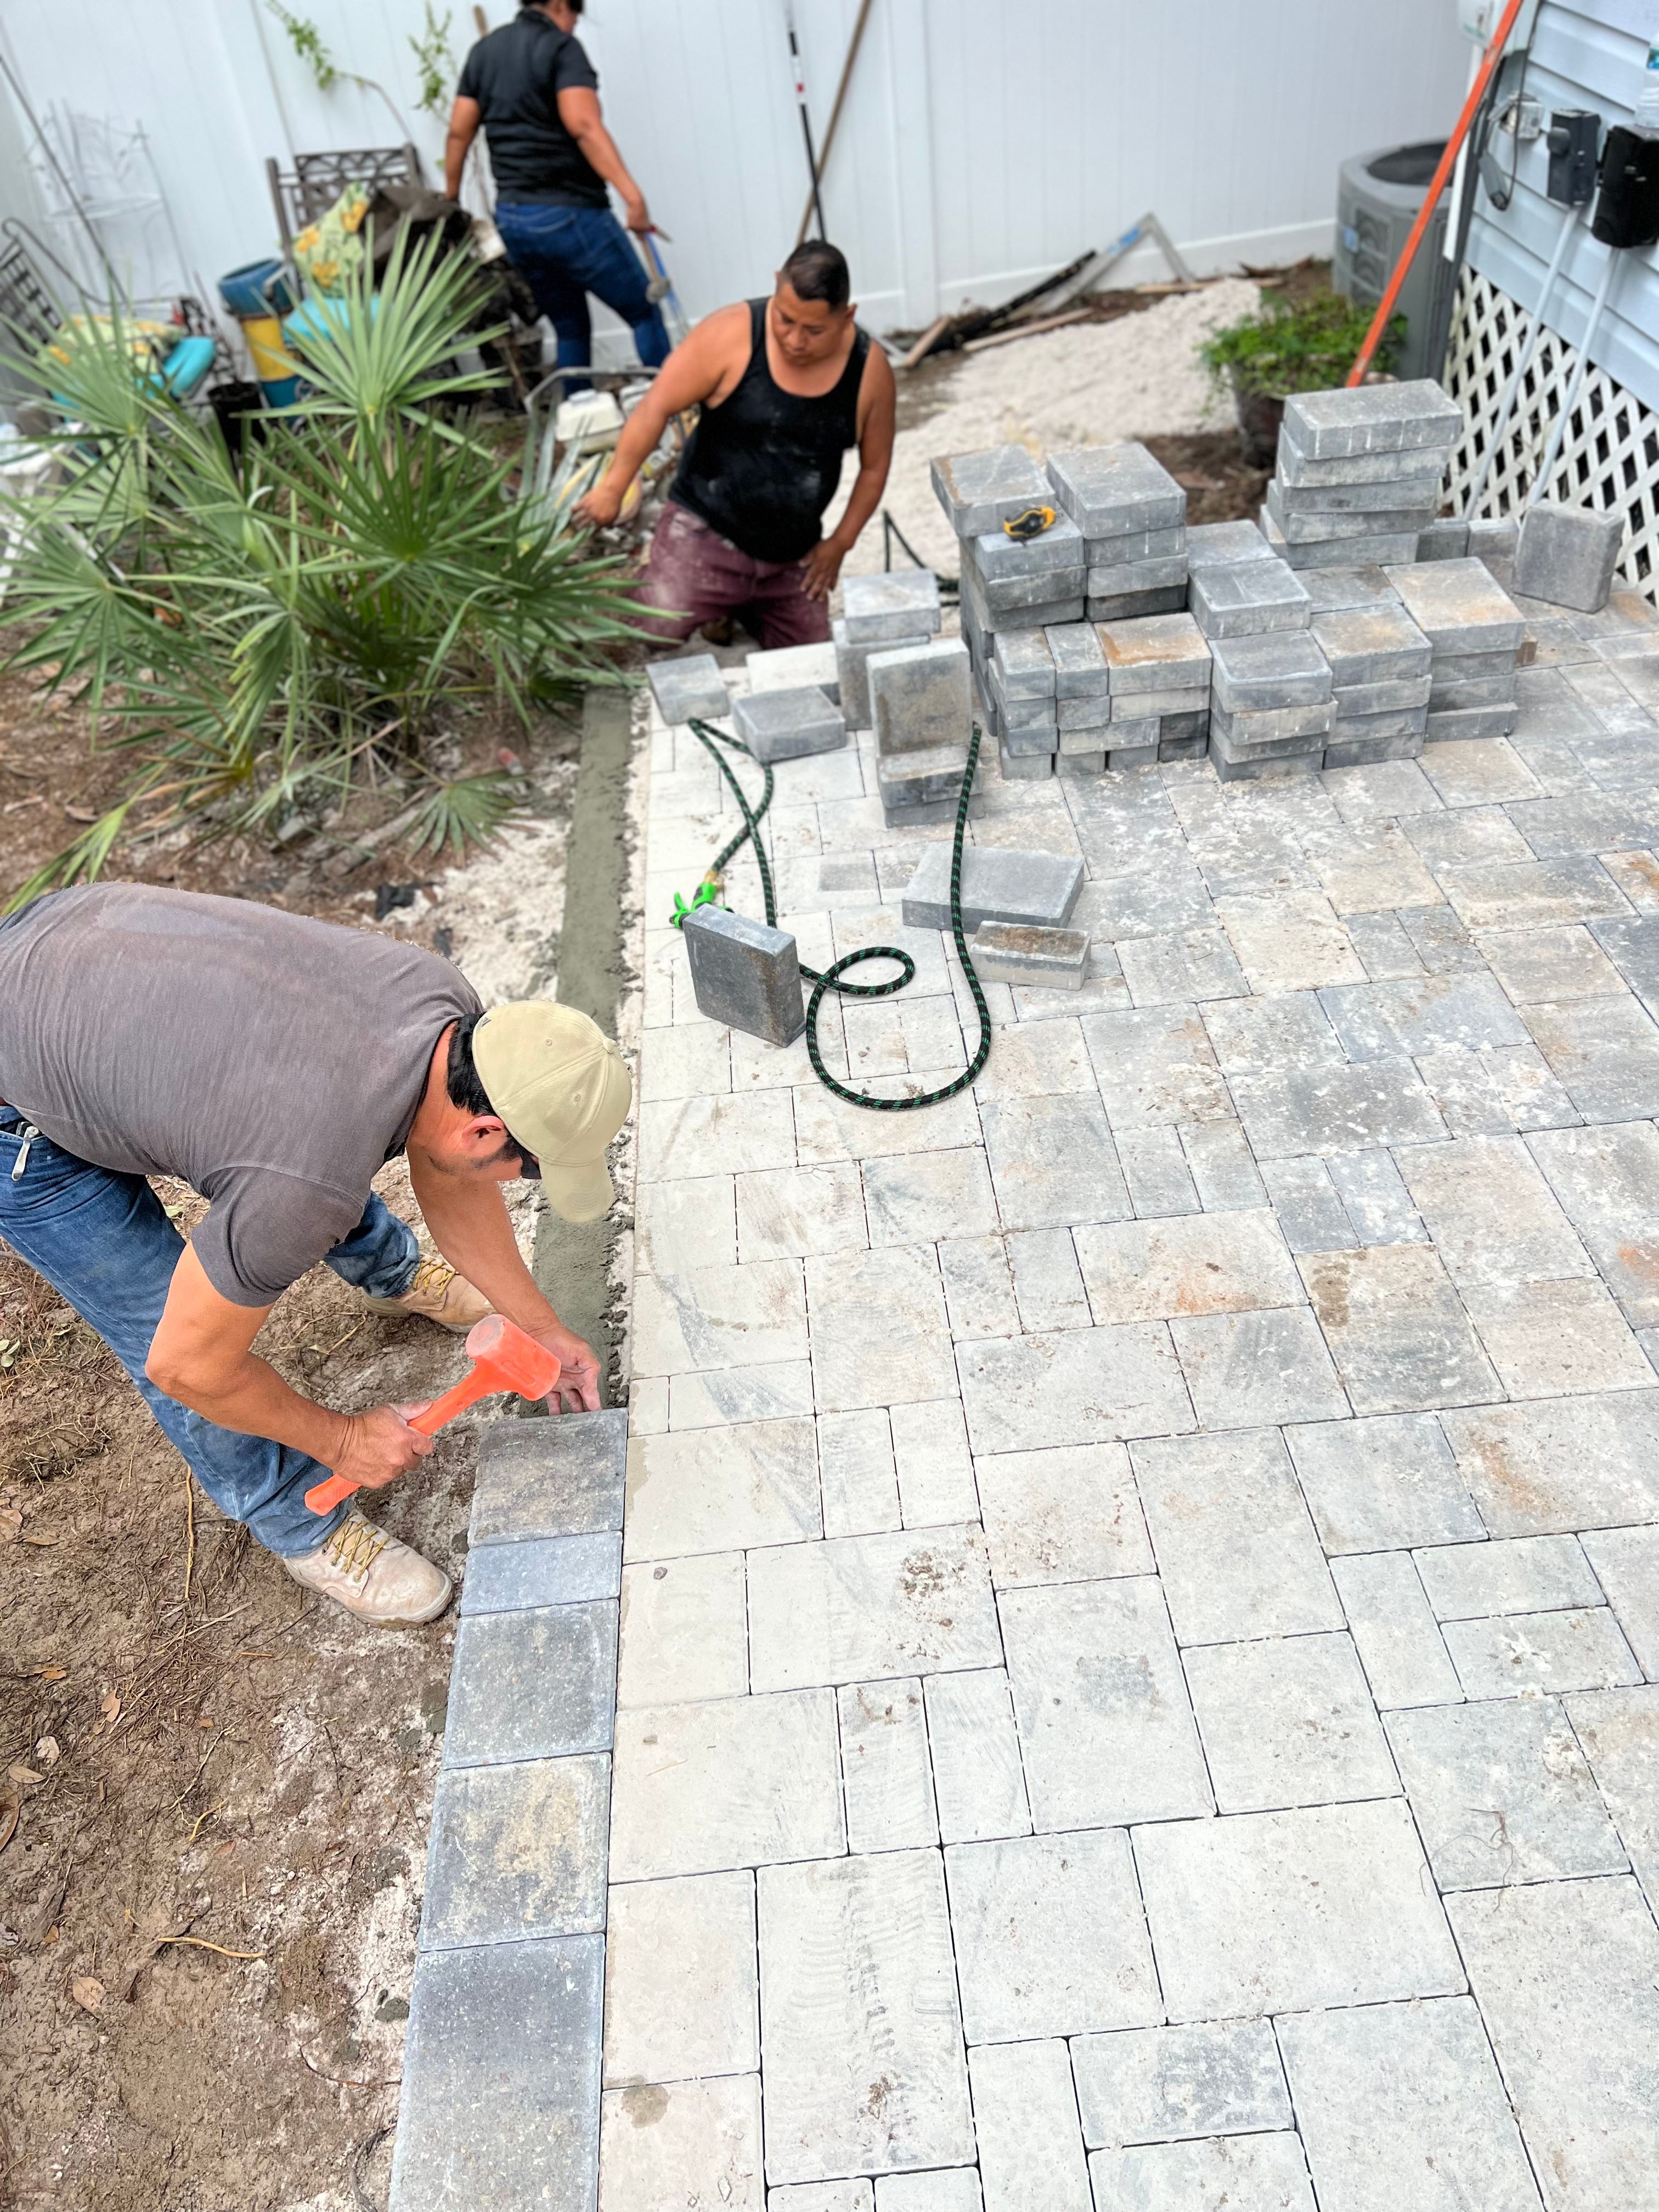 Belgard Pavers for Everything for the Home Inc. in Santa Rosa Beach, FL